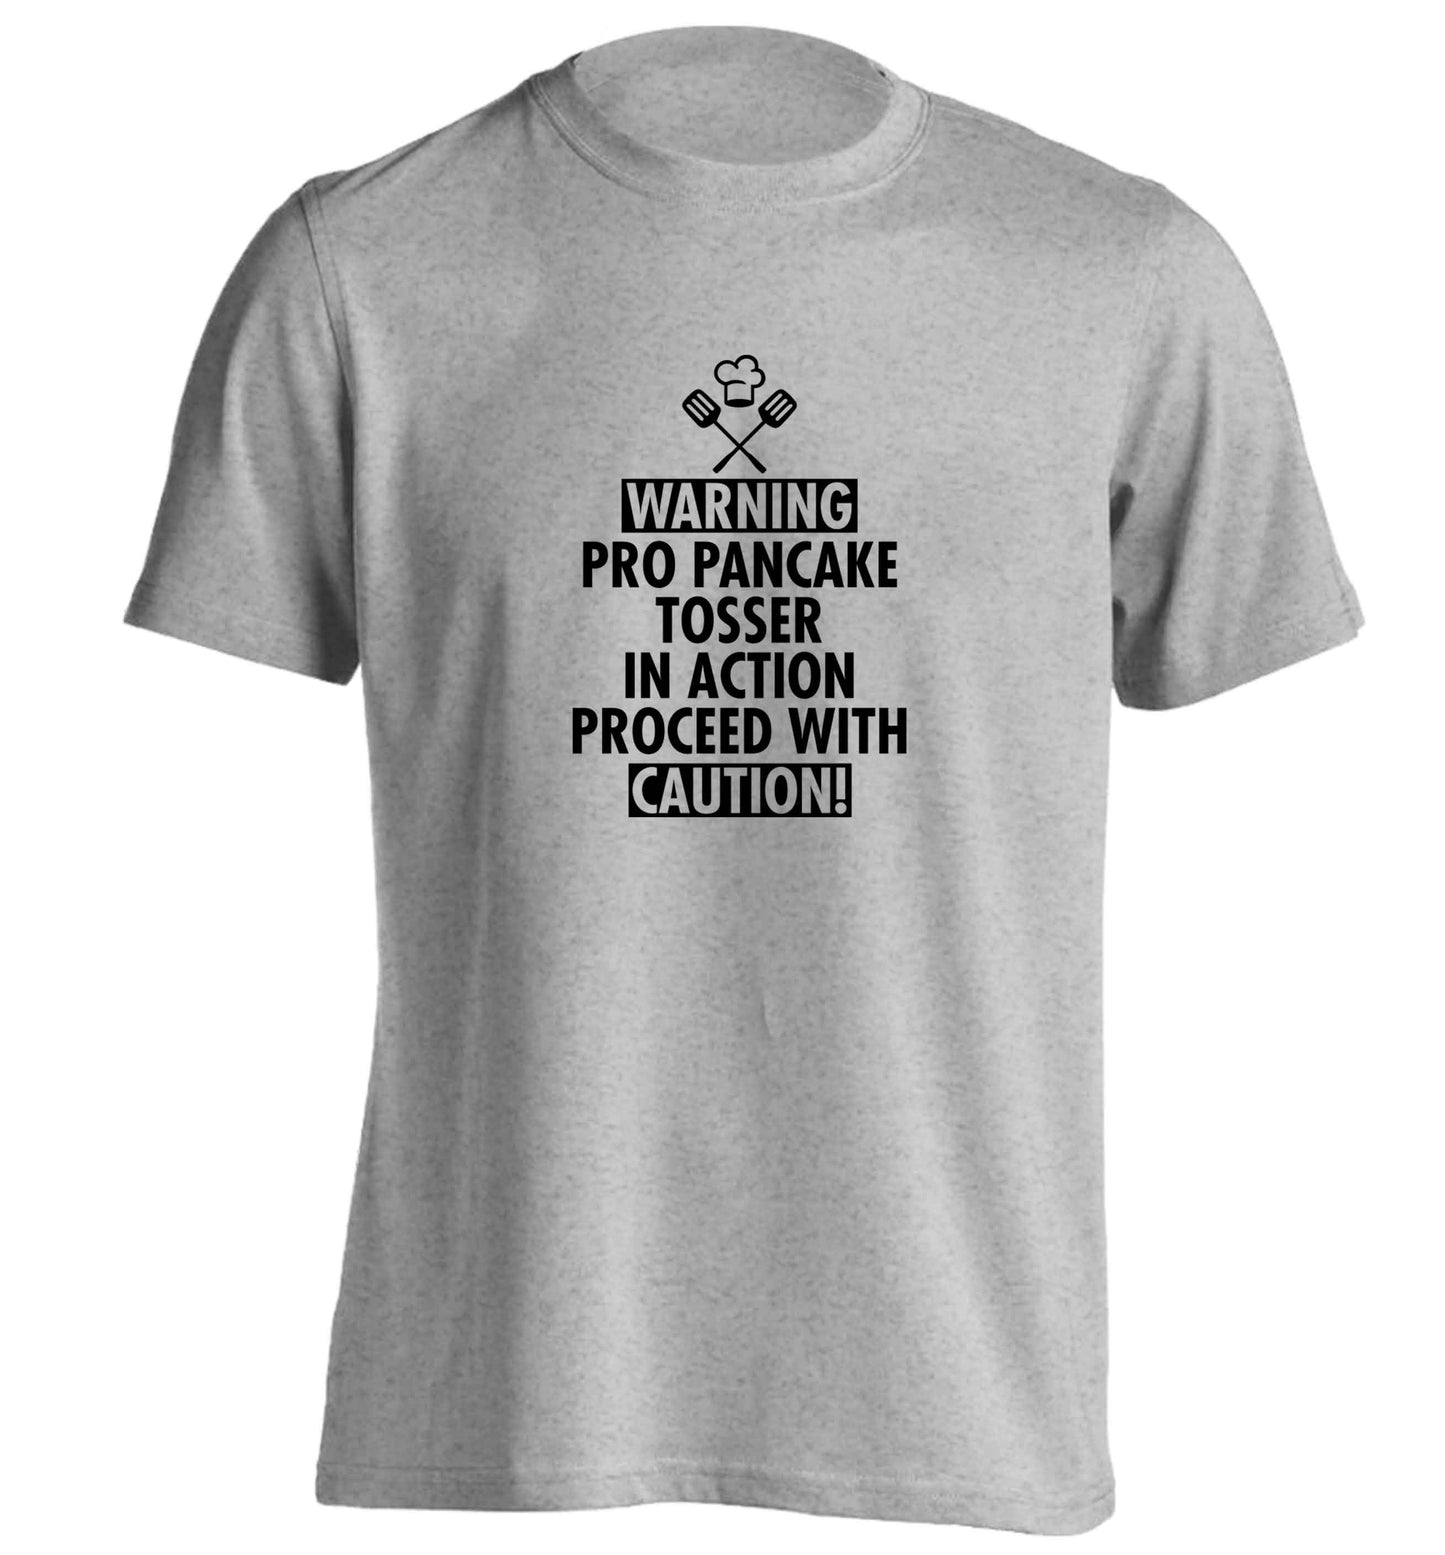 Warning pro pancake tosser in action proceed with caution adults unisex grey Tshirt 2XL